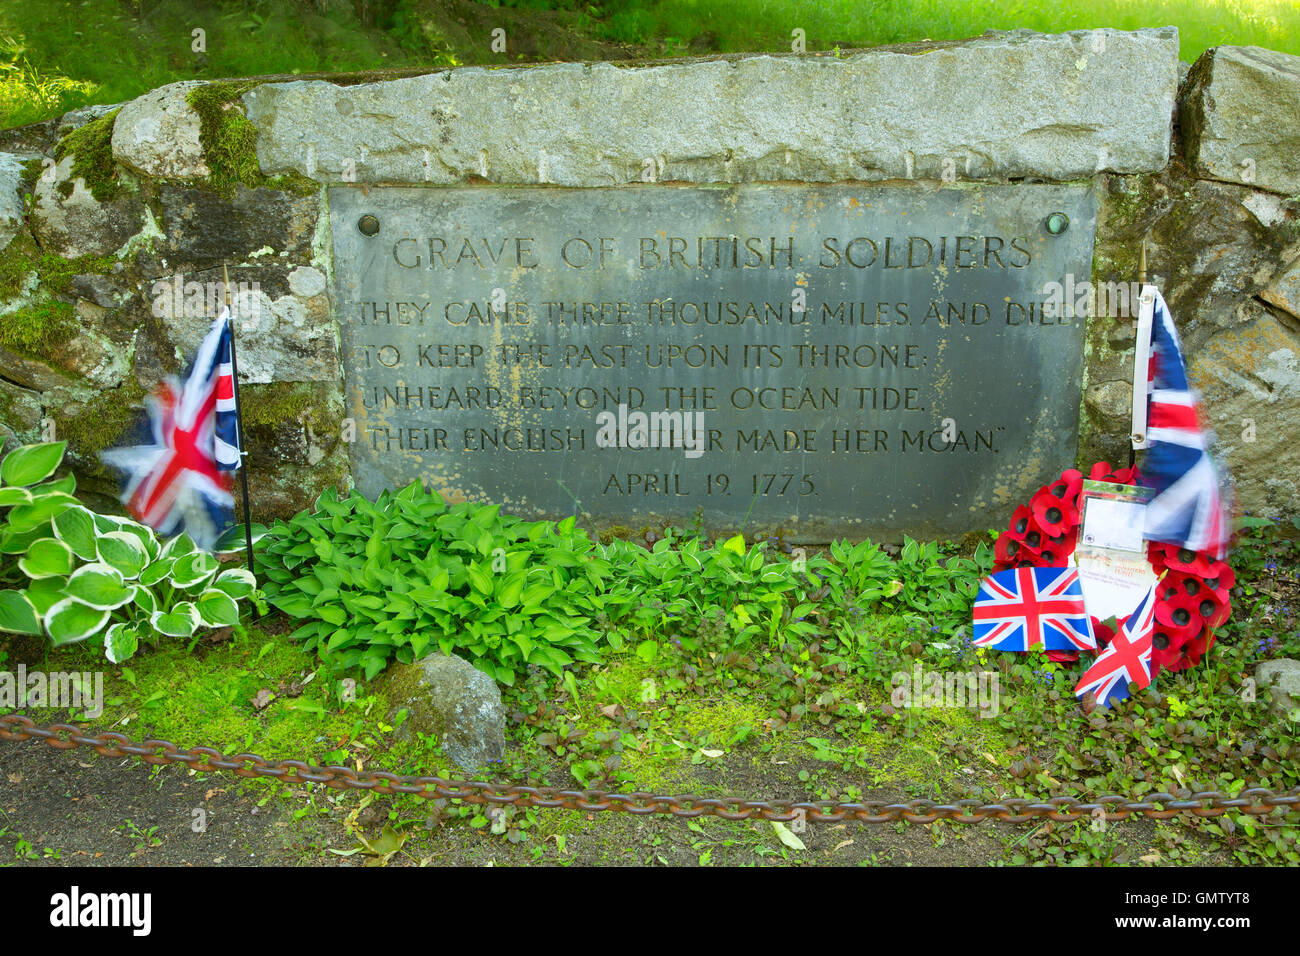 Grave of British Soldiers, Minute Man National Historical Park,  Massachusetts Stock Photo